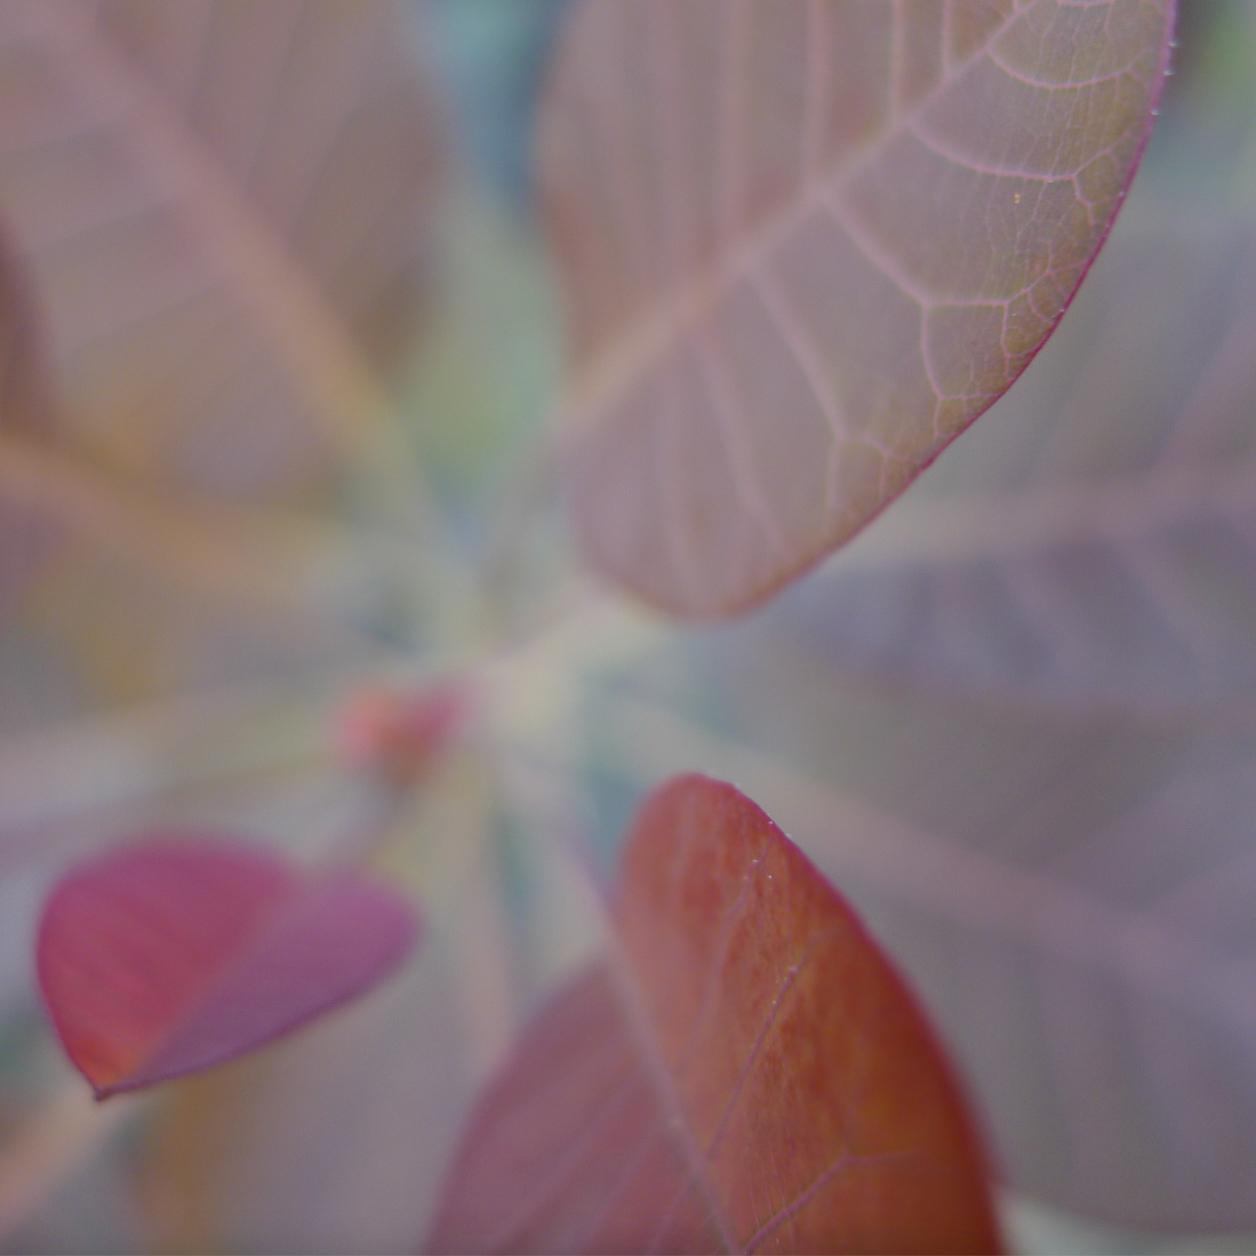 Closeup of a plant with redish-purple leaves, from above, slightly fuzzy/out of focus